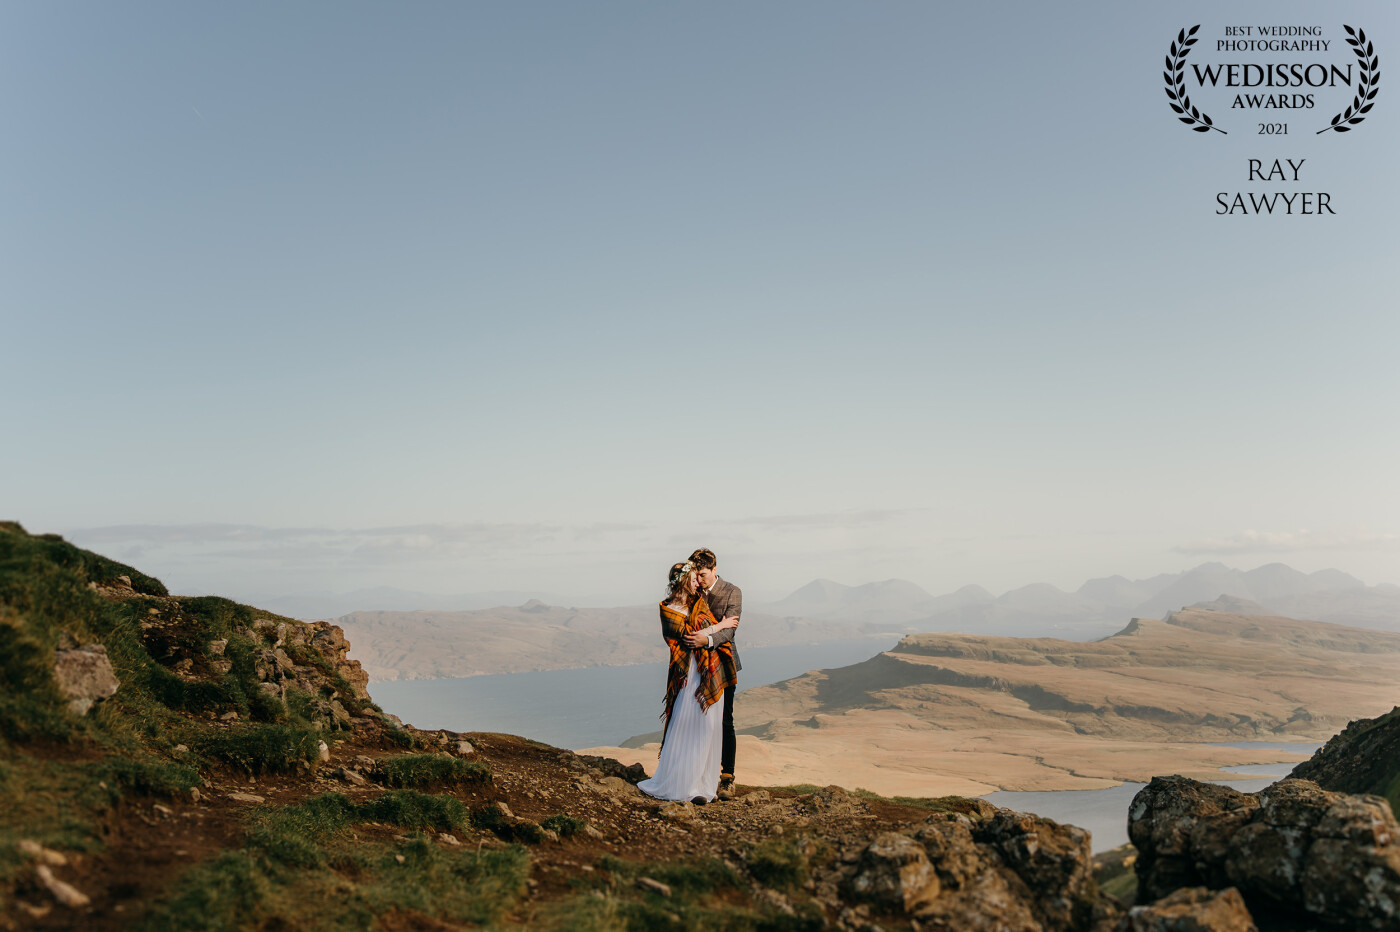 I captured this on an adventure shoot for one of my couples. We travelled 8 hours to the Isle of Skye and hiked up to the Old Man of Storr. What a place. beautiful. The couple look awesome in the surroundings. It was very cold that day too. haha